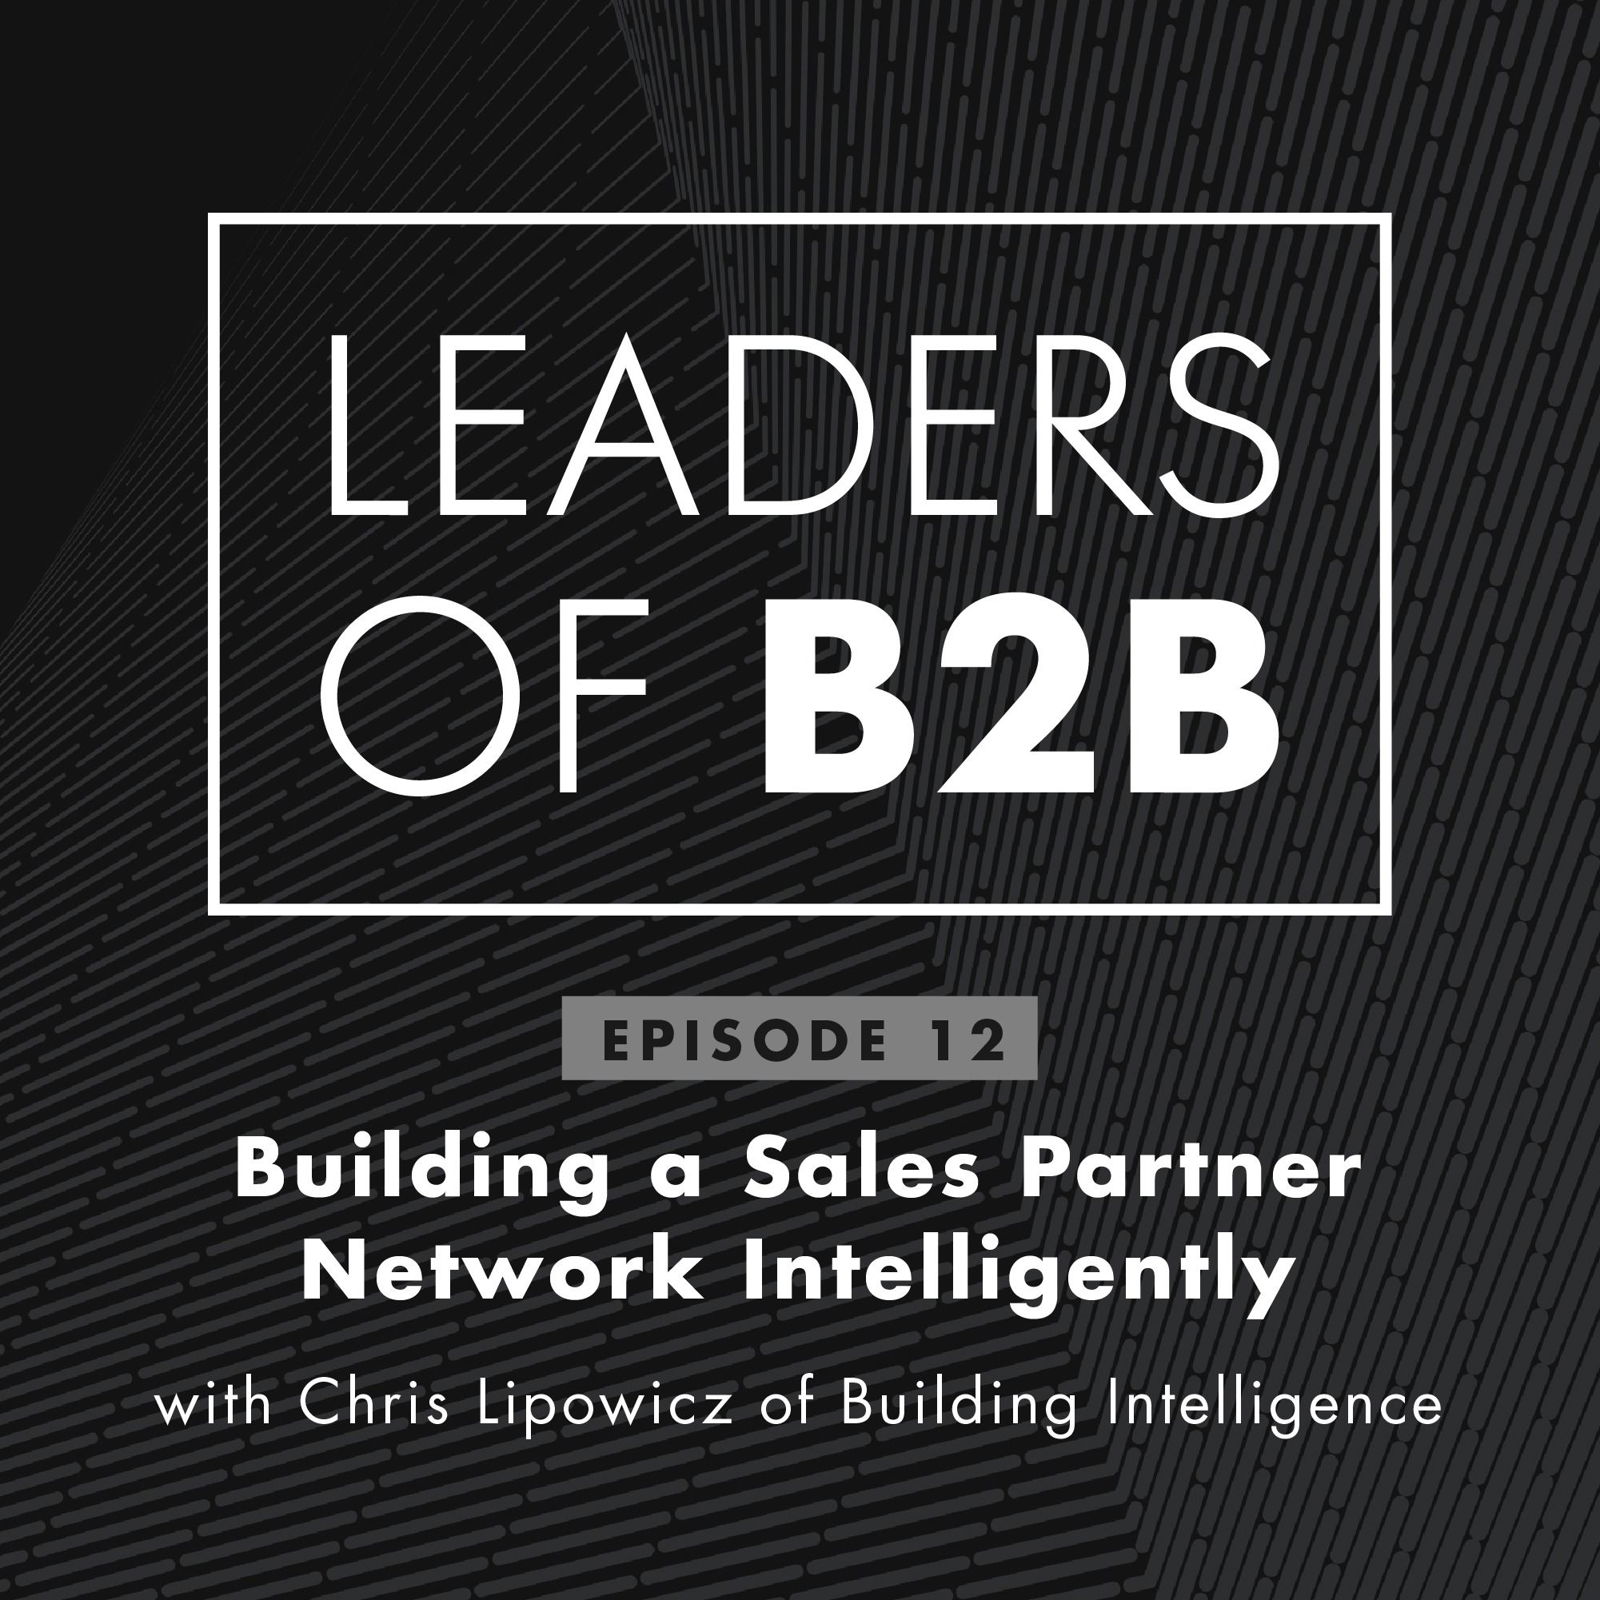 Building a Sales Partner Network Intelligently with Chris Lipowicz of Building Intelligence